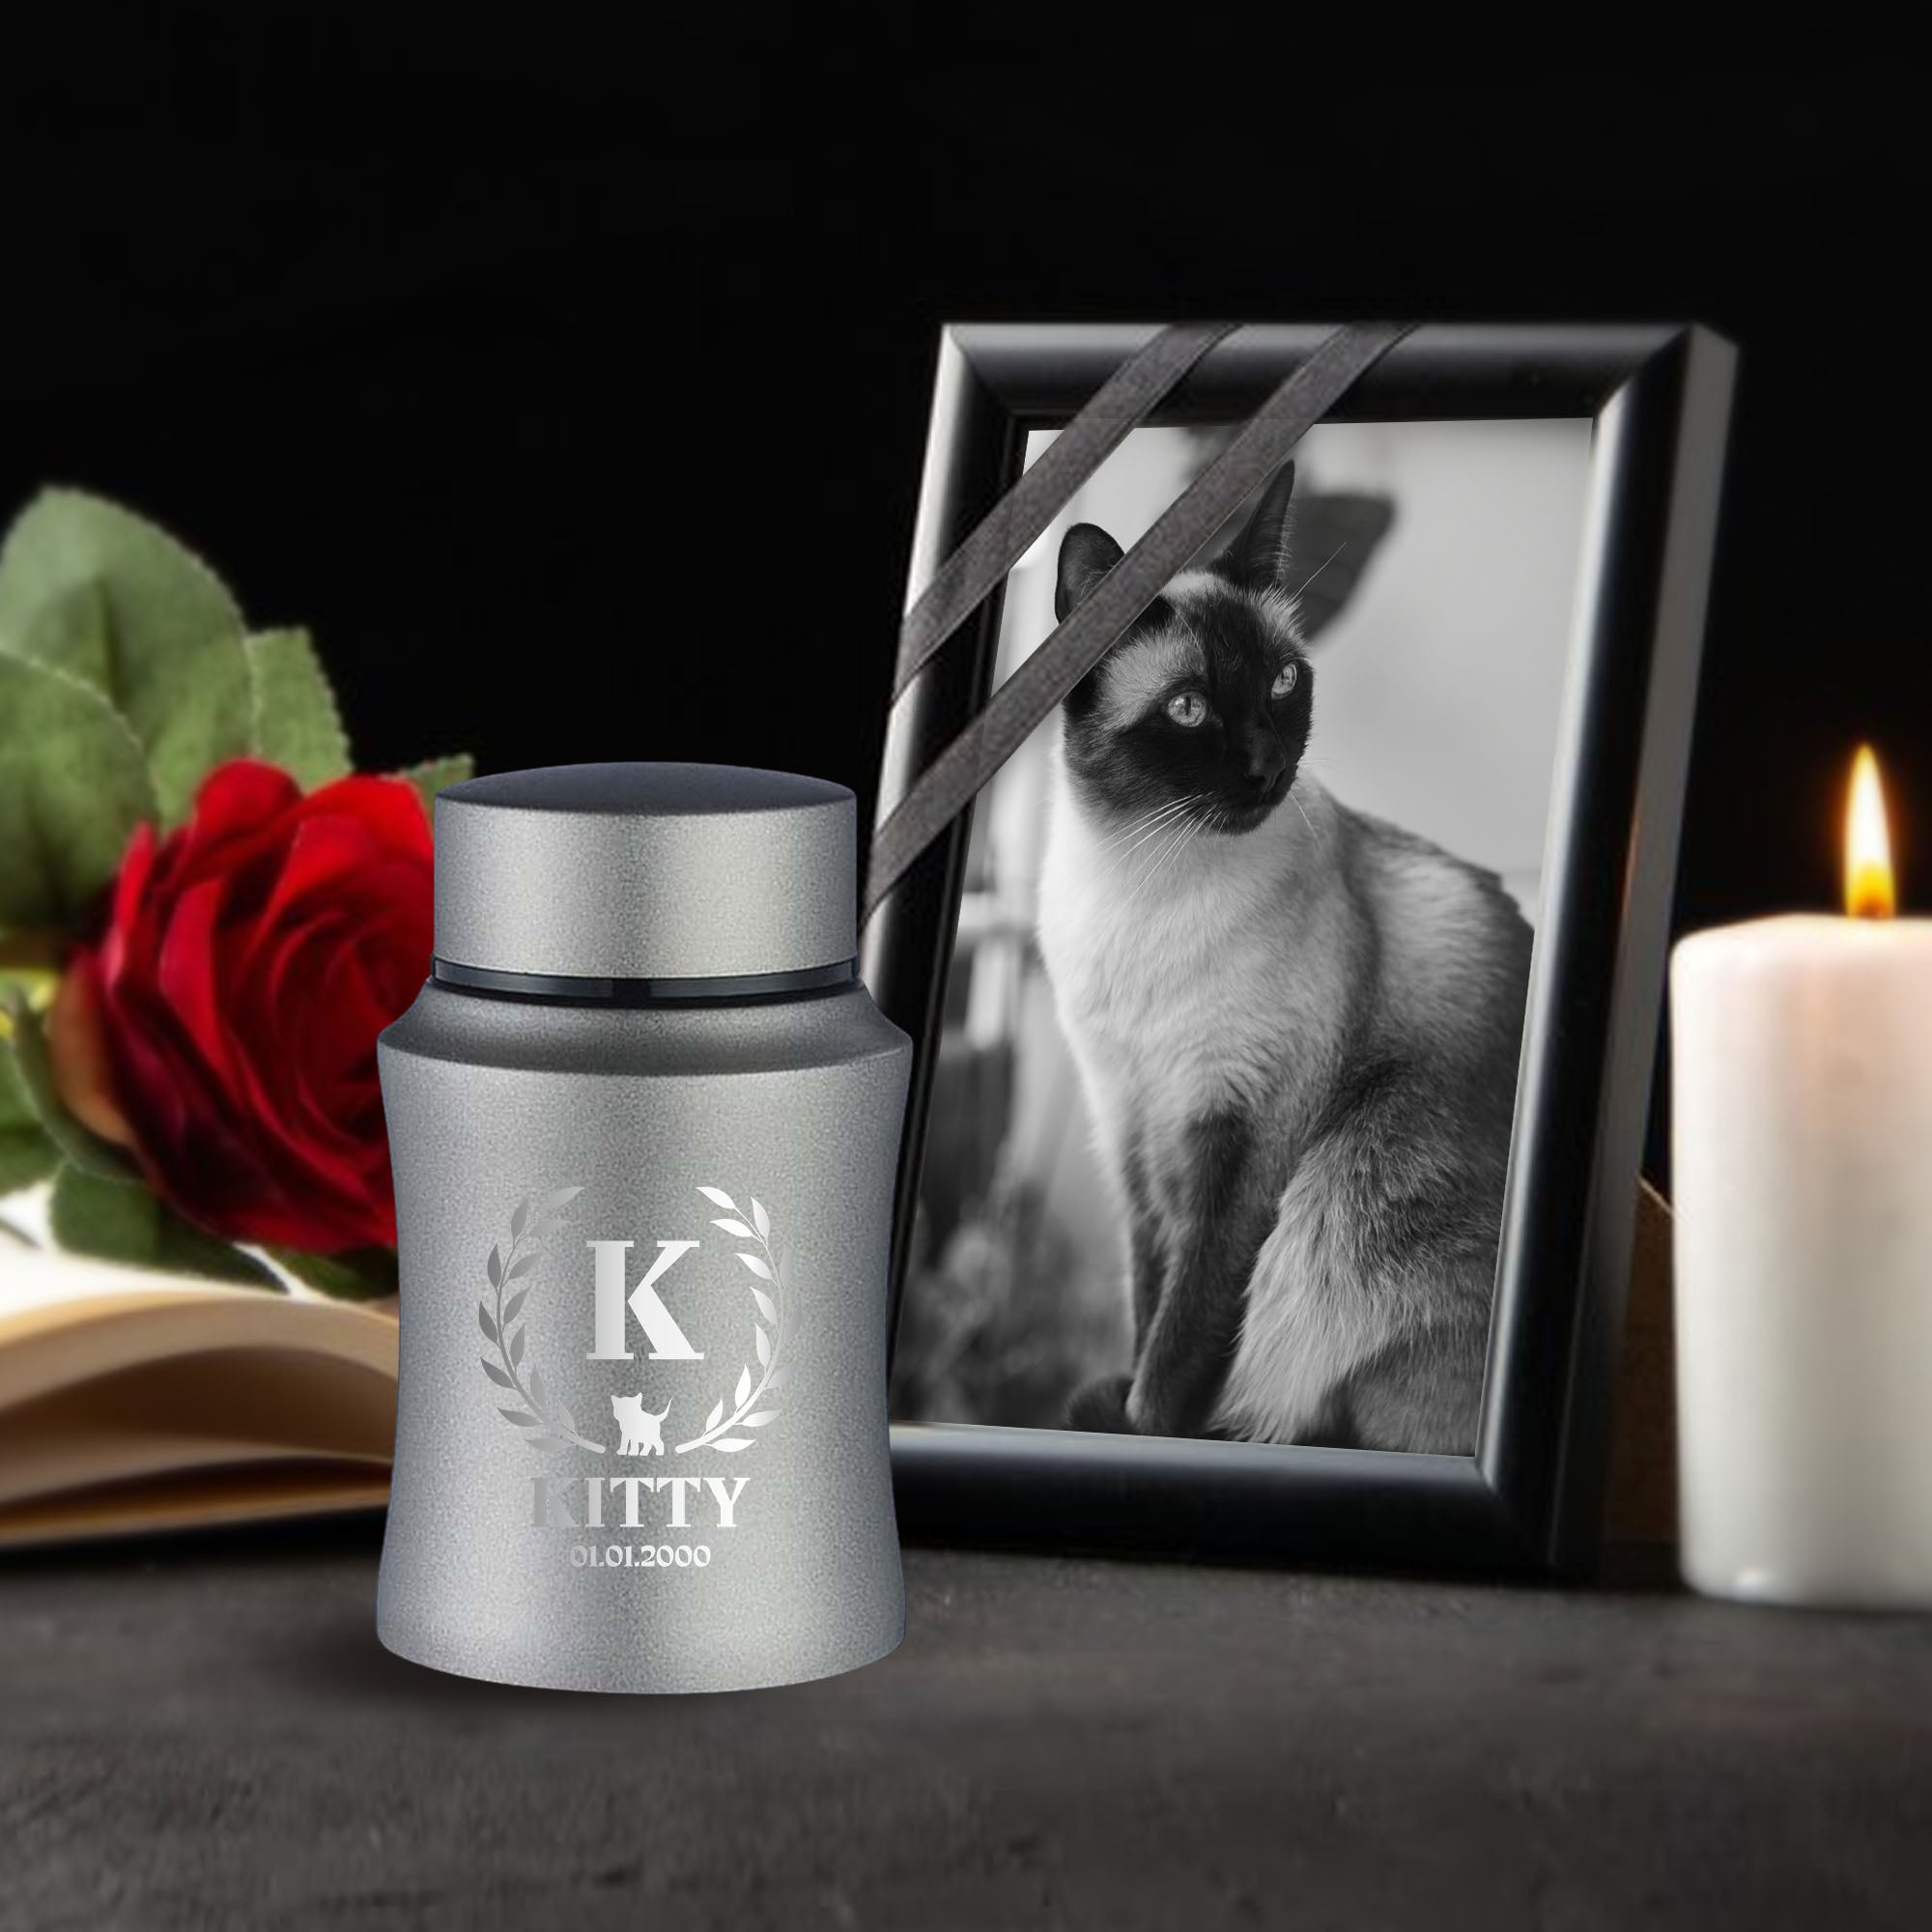 Customized Small Keepsake Urn Personalized Engraved with Pet Name, Date, and Text - 4" Powder Coated Cremation Mini Compact Urn for Cat Ashes | 5–10 Lbs Capacity.